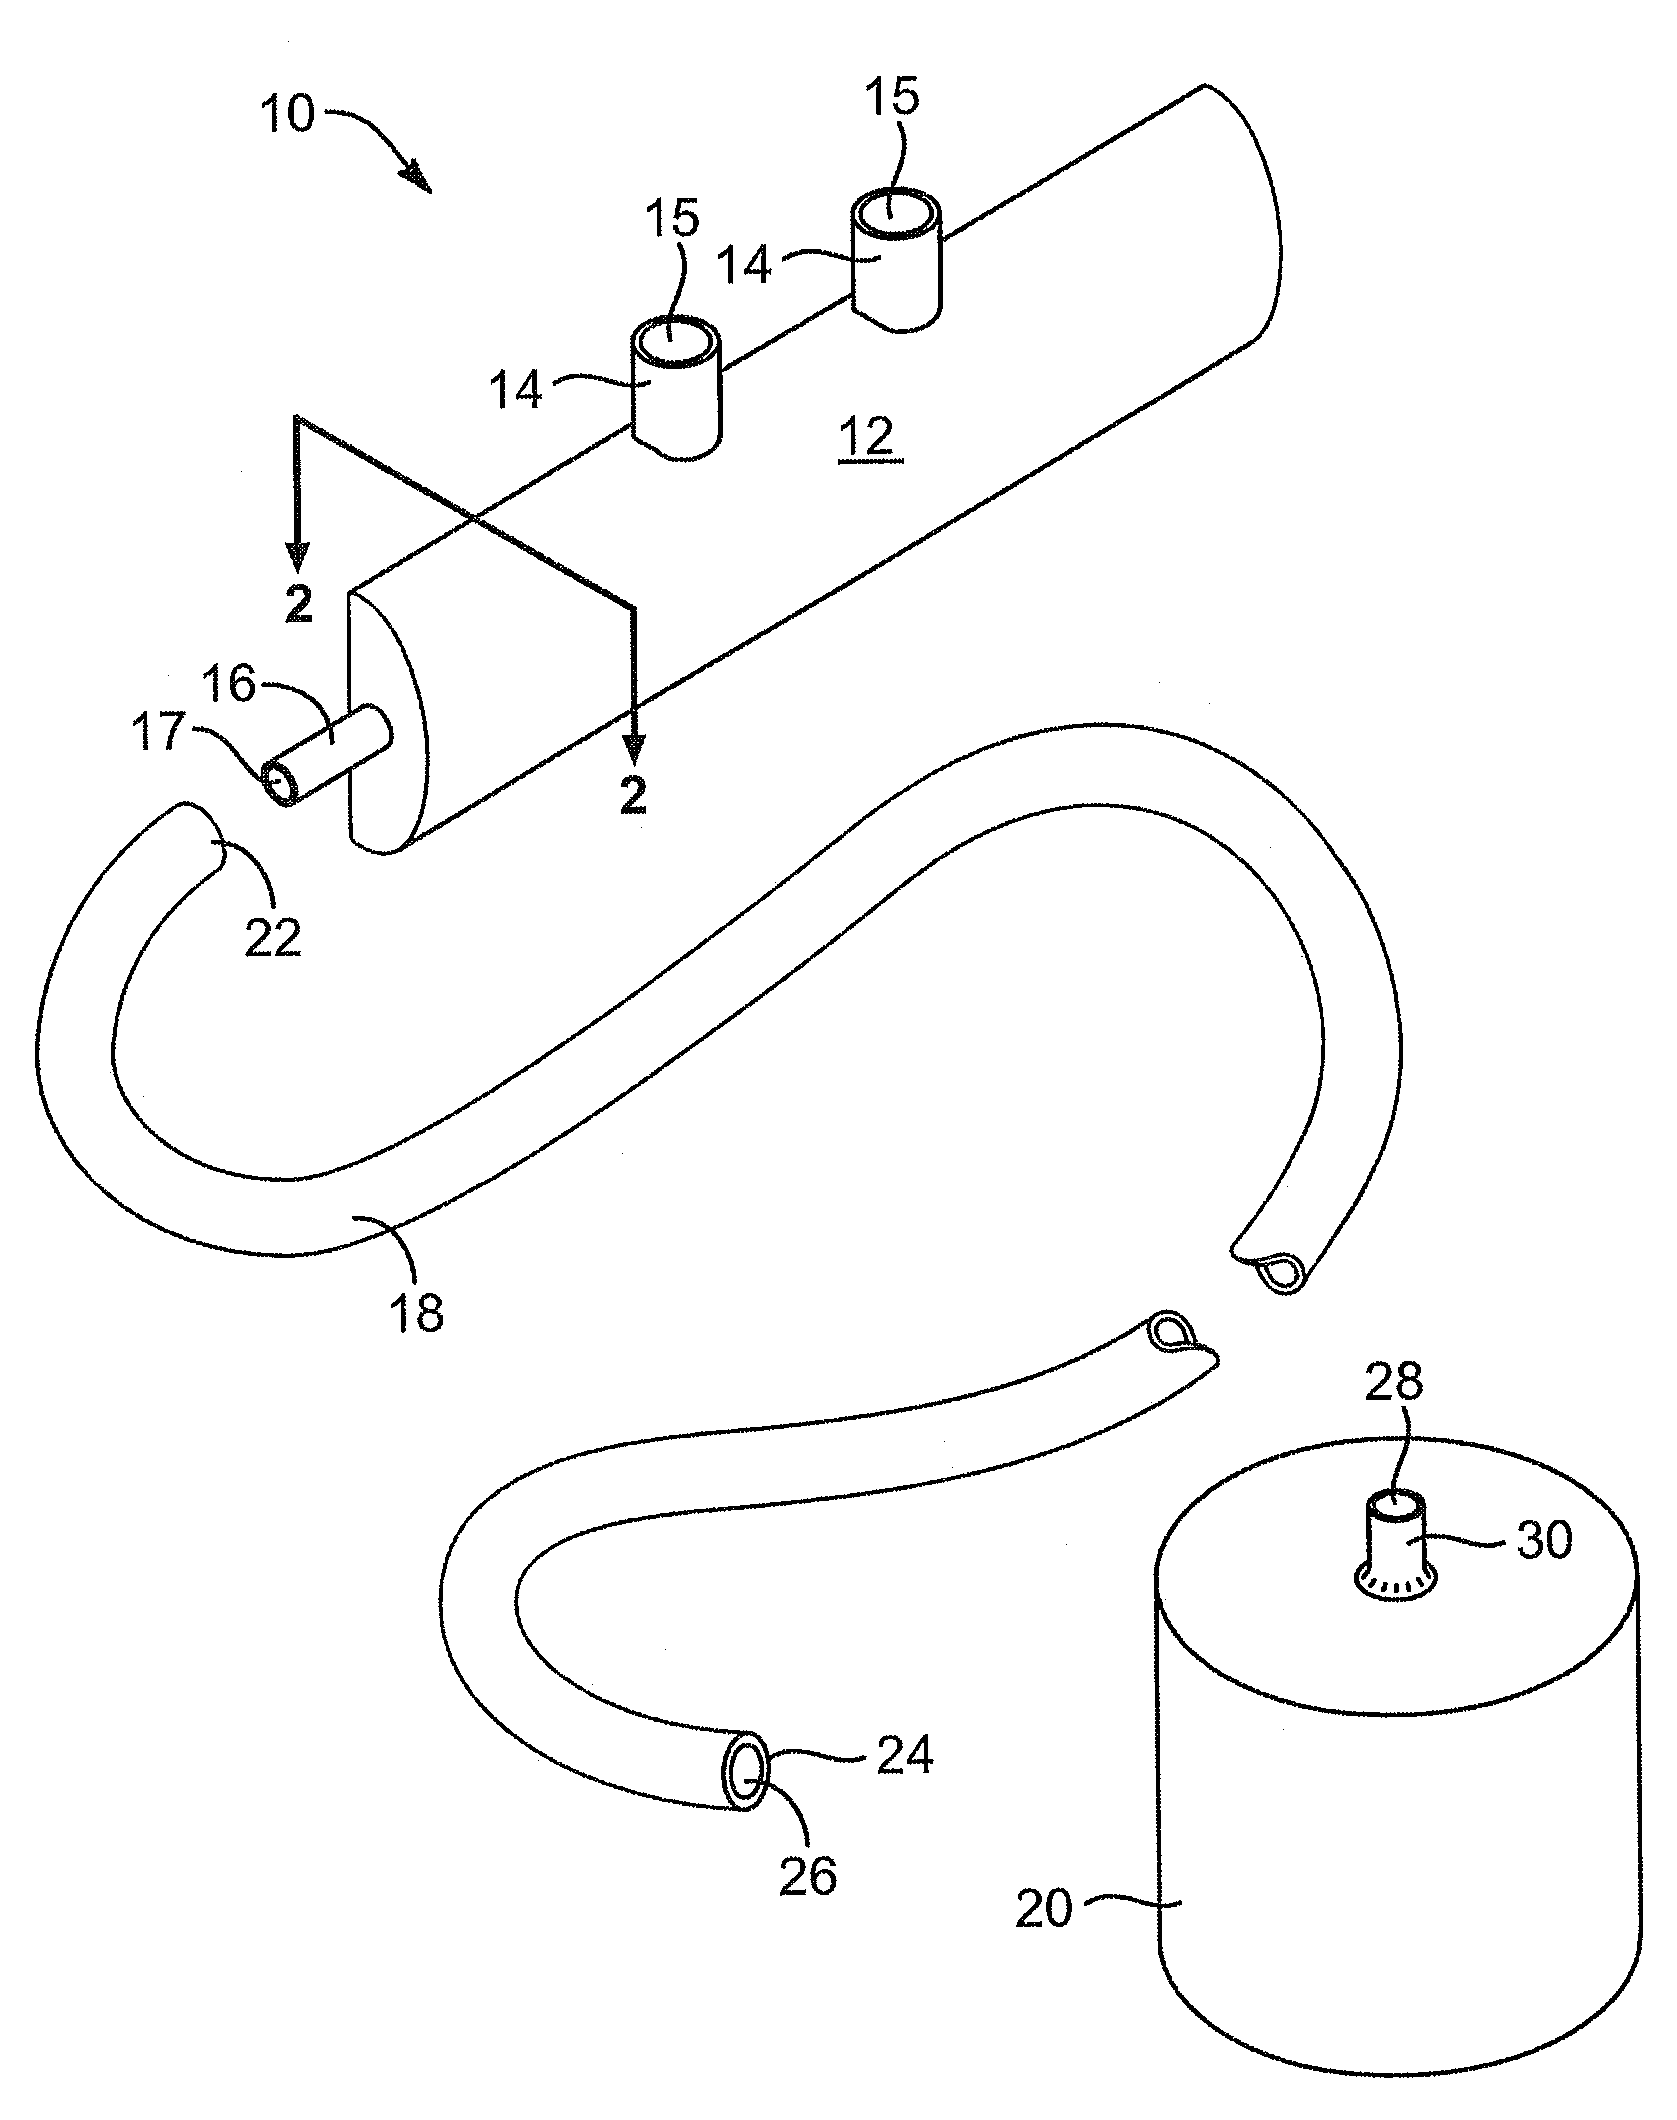 Nitric oxide reactor and distributor apparatus and method